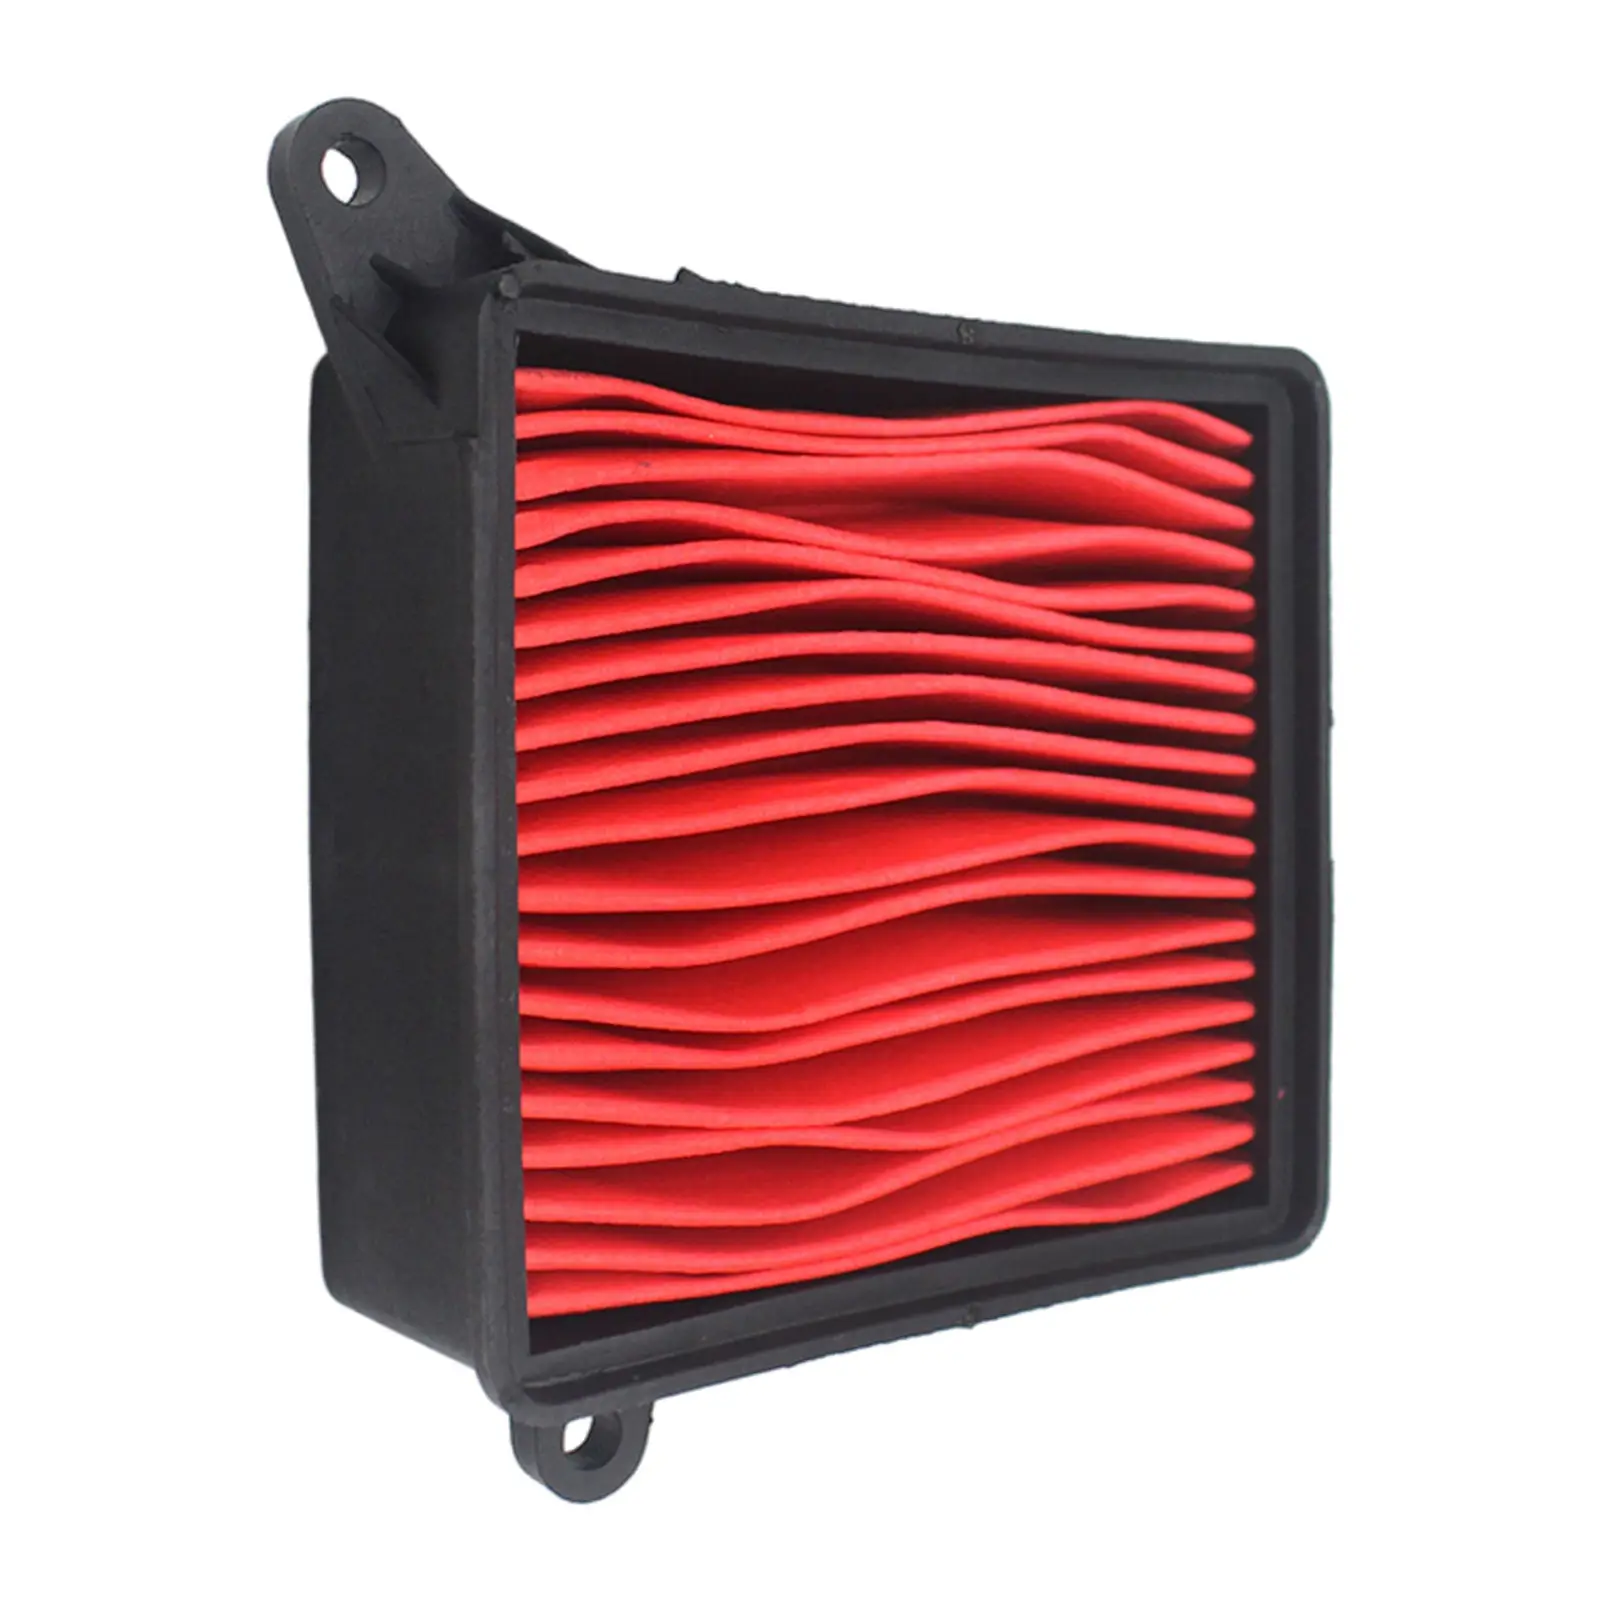 Air Filter Replaces fits for Kymco Agility 125R 125cc, Spare Parts